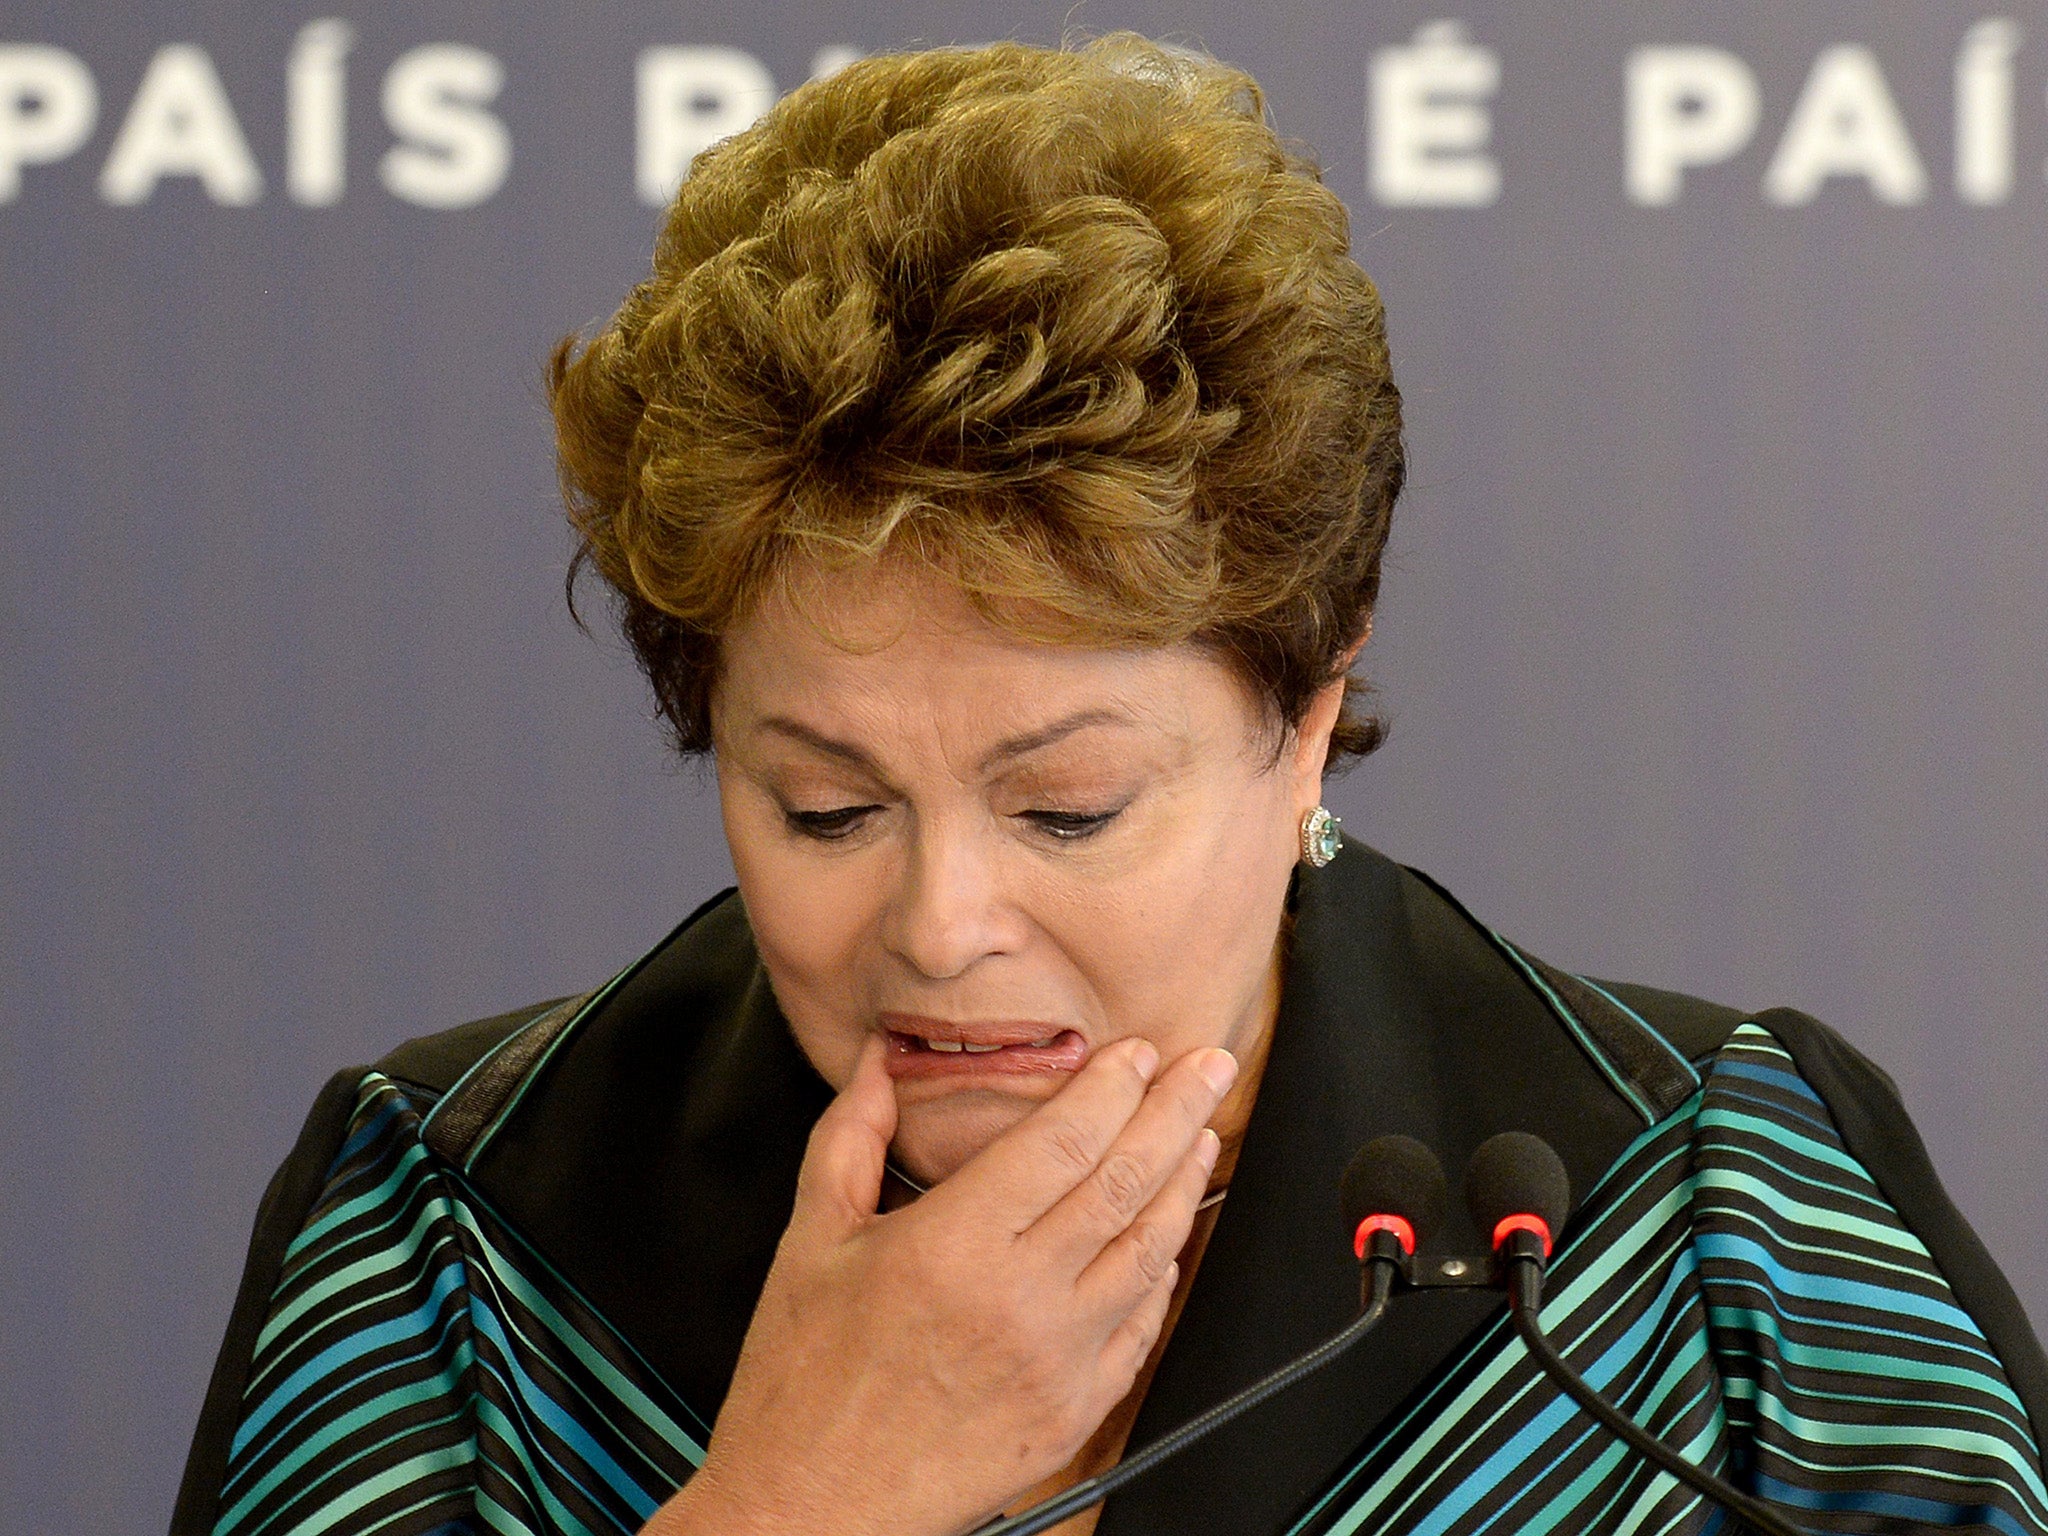 Brazilian President Dilma Rousseff cries while delivering a speech.